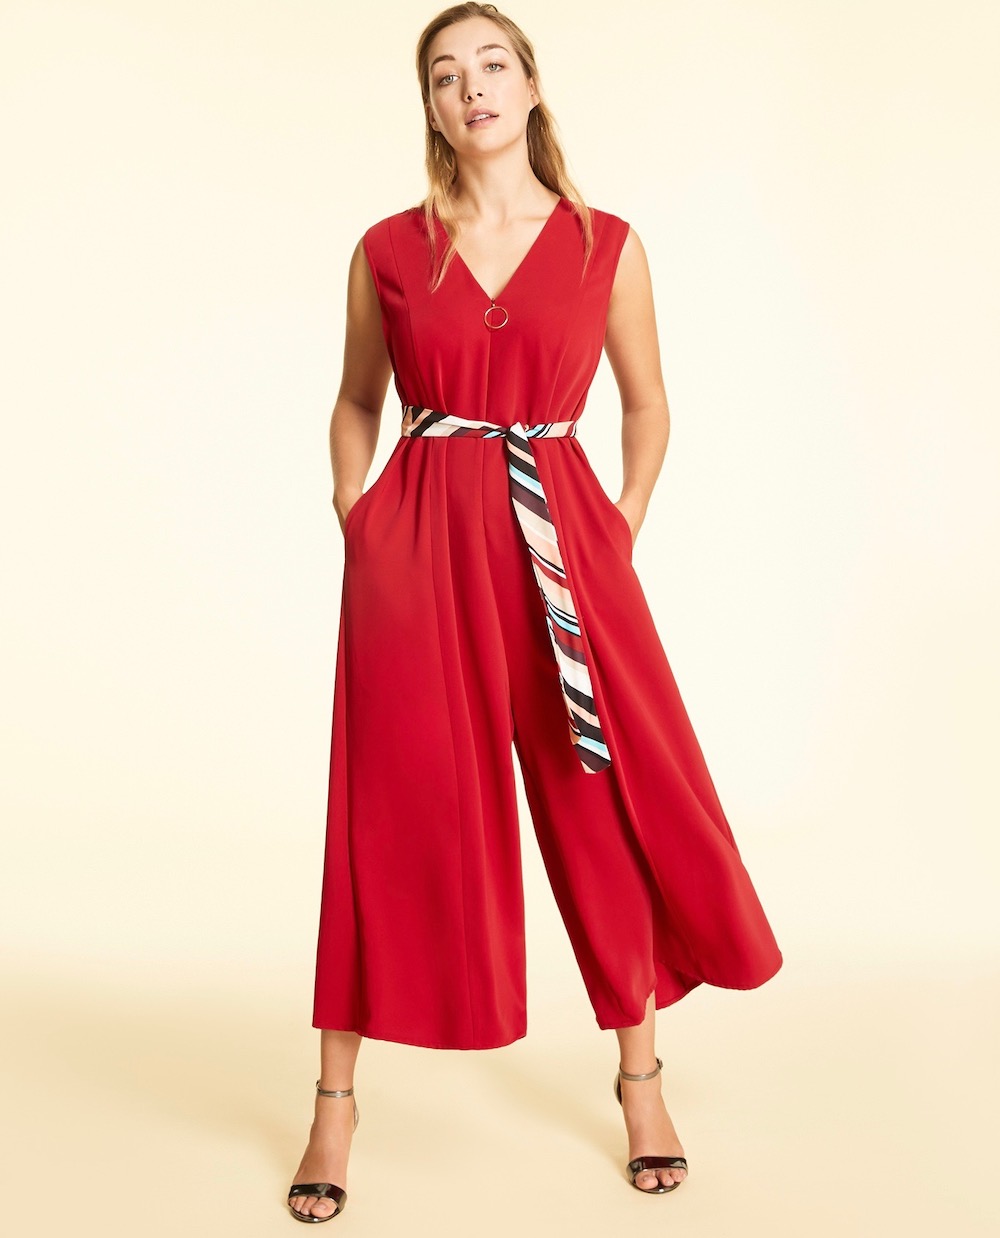 Plus-Size Jumpsuits for Late Summer to Early Fall - theFashionSpot